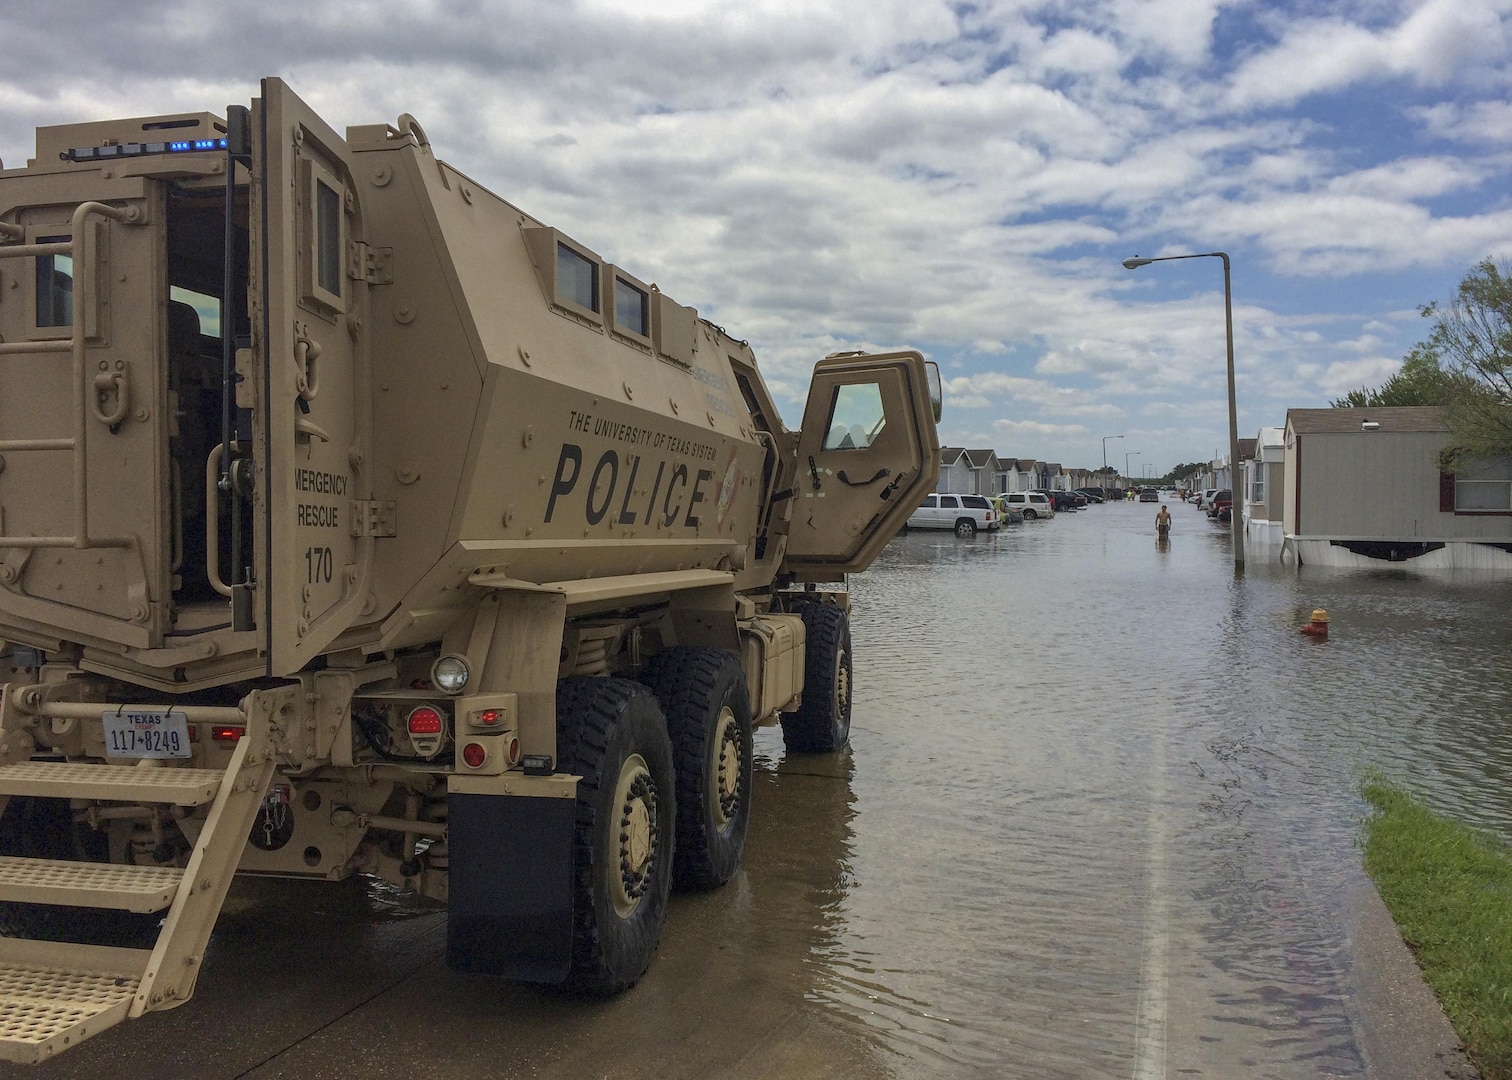 An MRAP operated by the Police officers from the University of Texas System was instrumental in transporting doctors to the school’s Houston Medical Center. The former military vehicle also delivered life-saving medical supplies to individuals who could not safely travel in the high water from Hurricane Harvey.